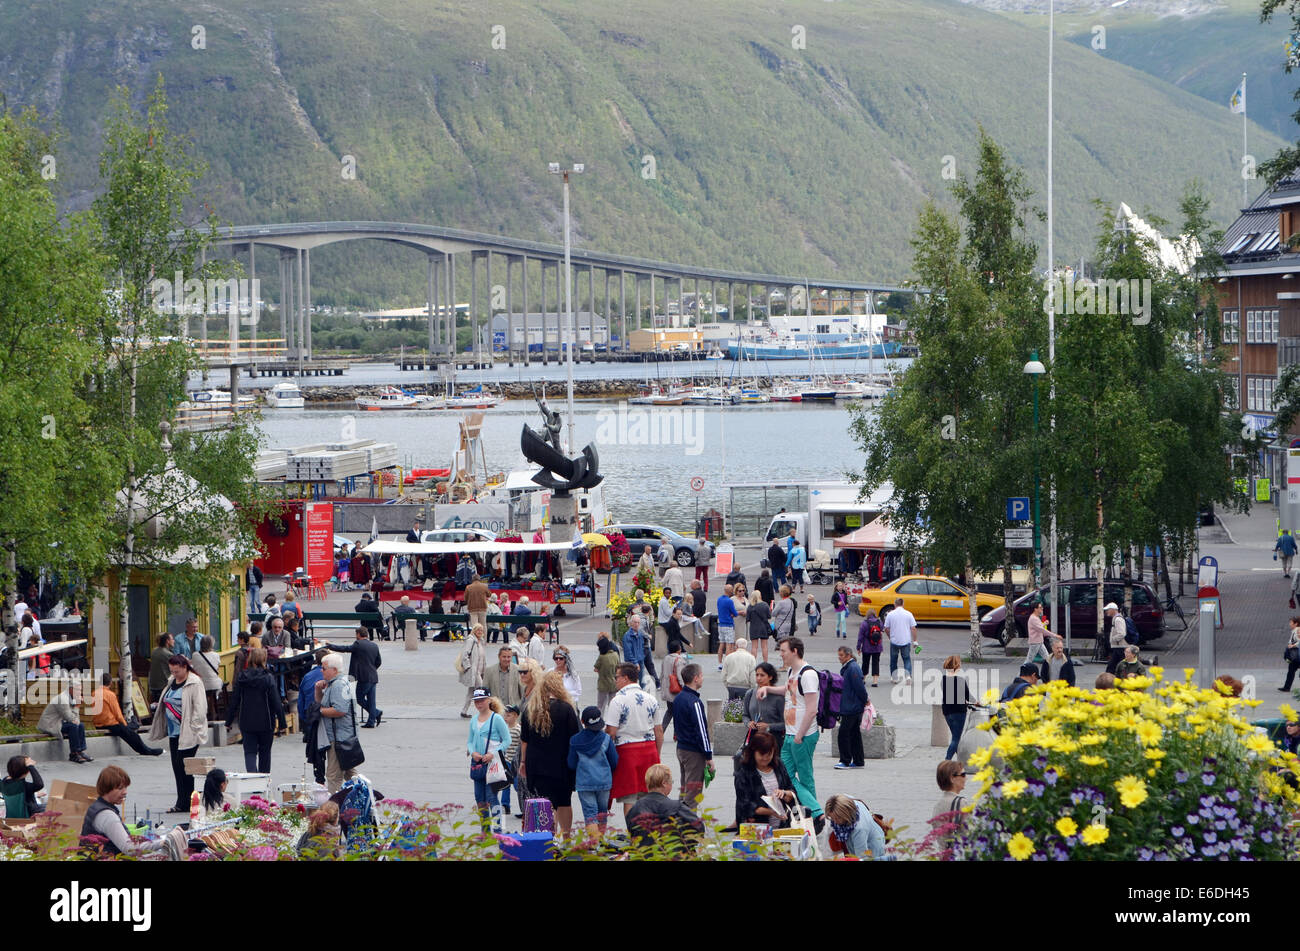 The town centre of Tromso,People shopping.Town popular for RoaldAmundsen, being most northerly ,ArcticCathedral,modern festivals Stock Photo